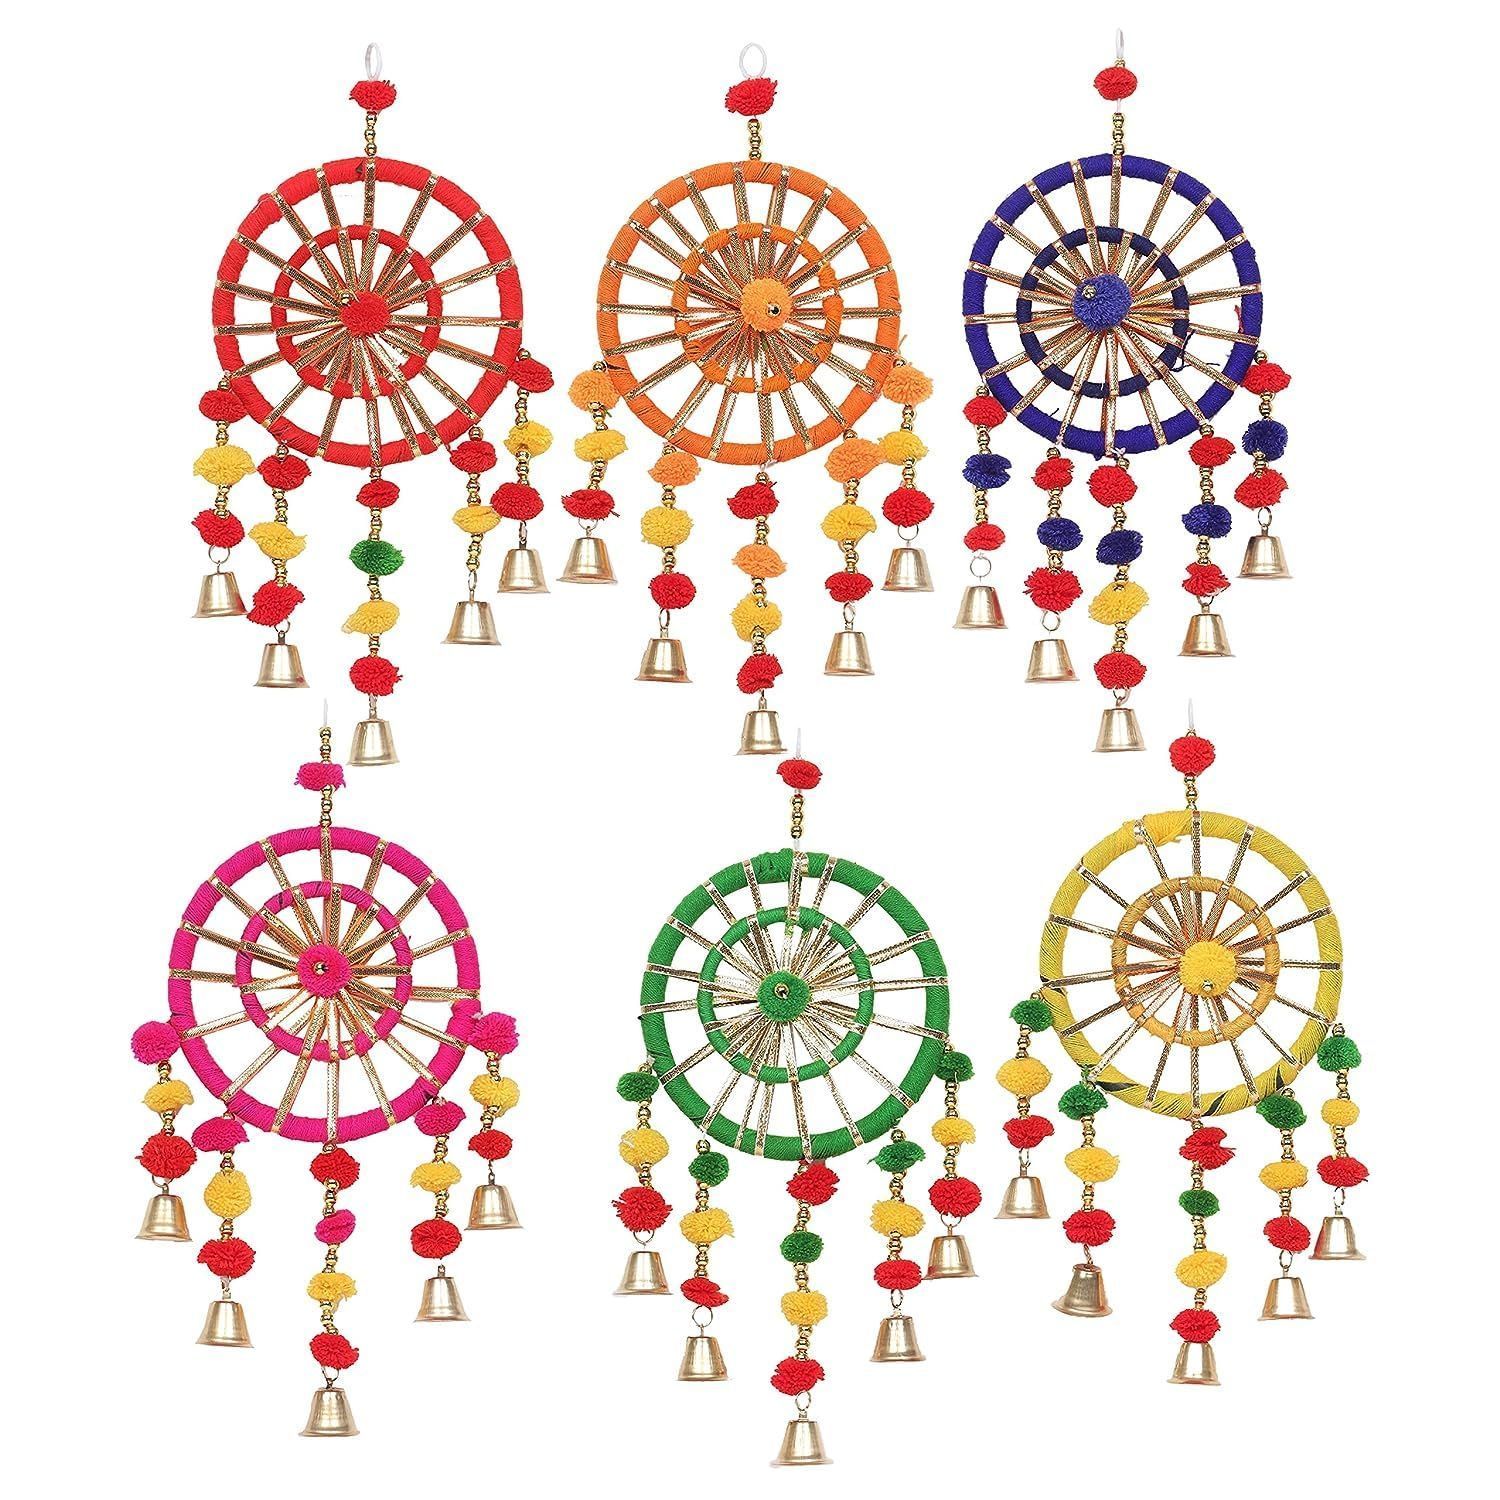 kalakriti Hangings for Decoration/Wall Hangings with Rings for Haldi Mehandi Temple Decor | Pooja Room Decoration Items | Back Dropper | showpiece for Home Decor (Pack of 6, Multicolor)